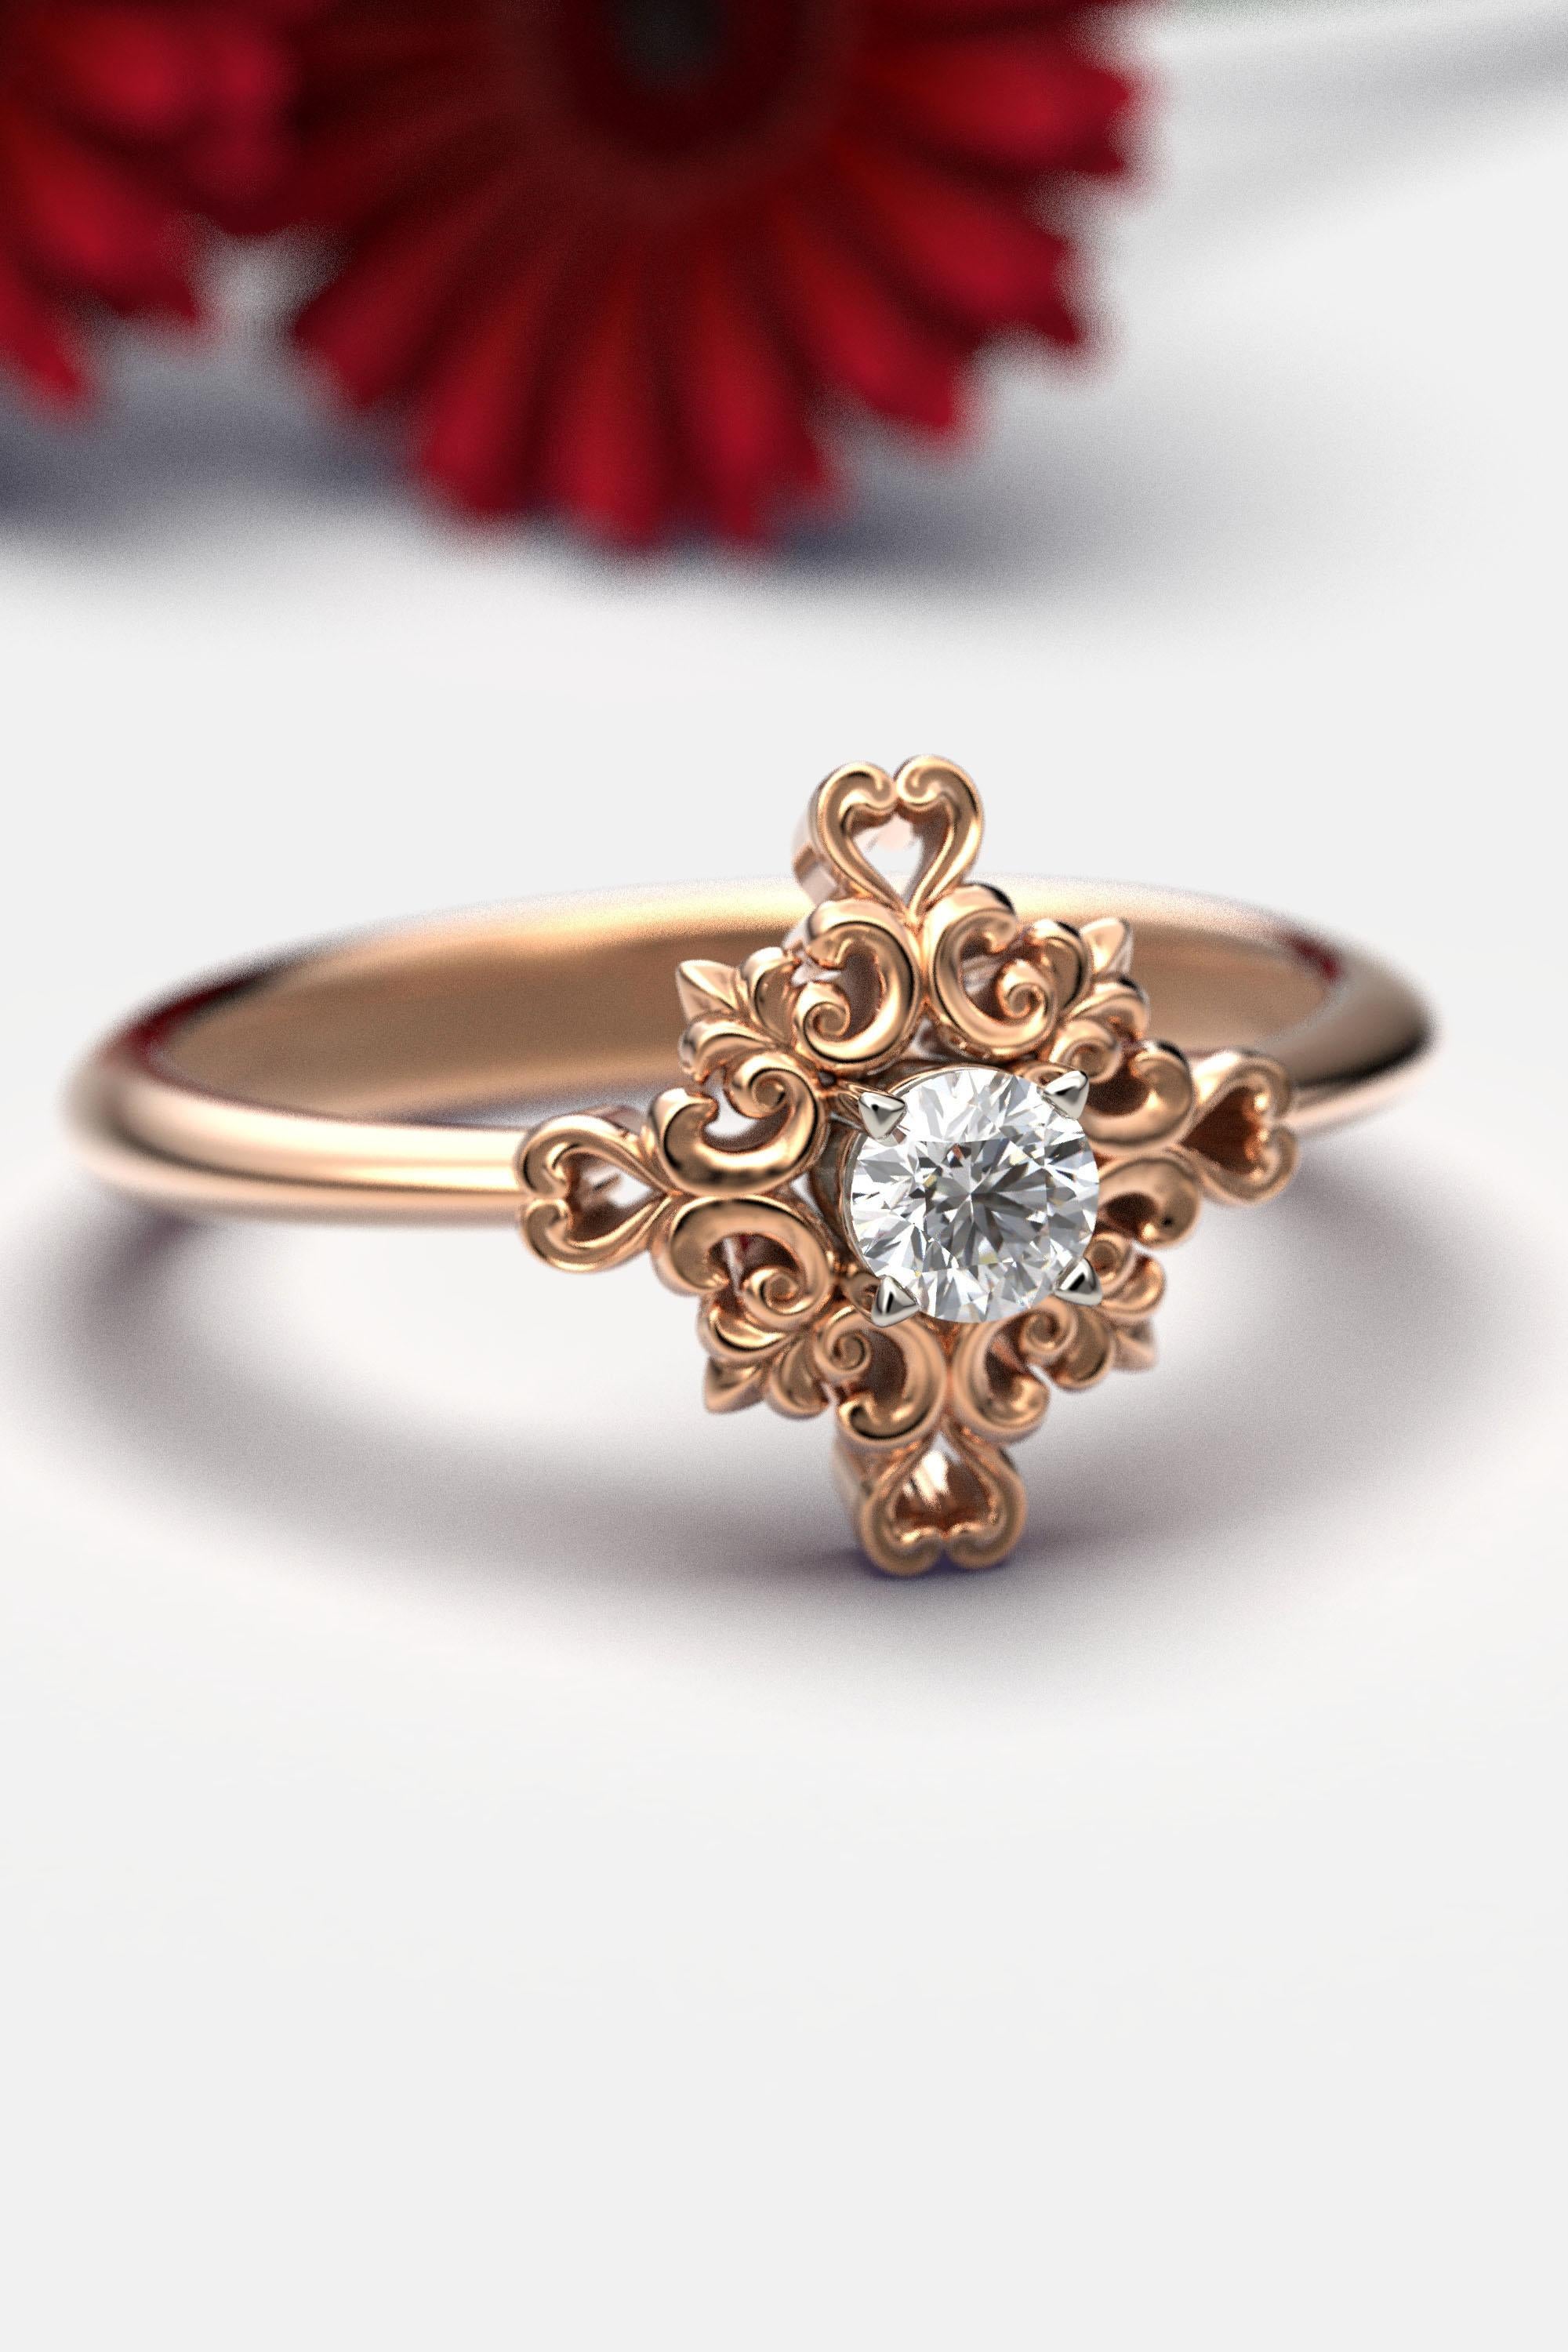 For Sale:  Italian Diamond Engagement Ring with Baroque Setting 18k gold 5